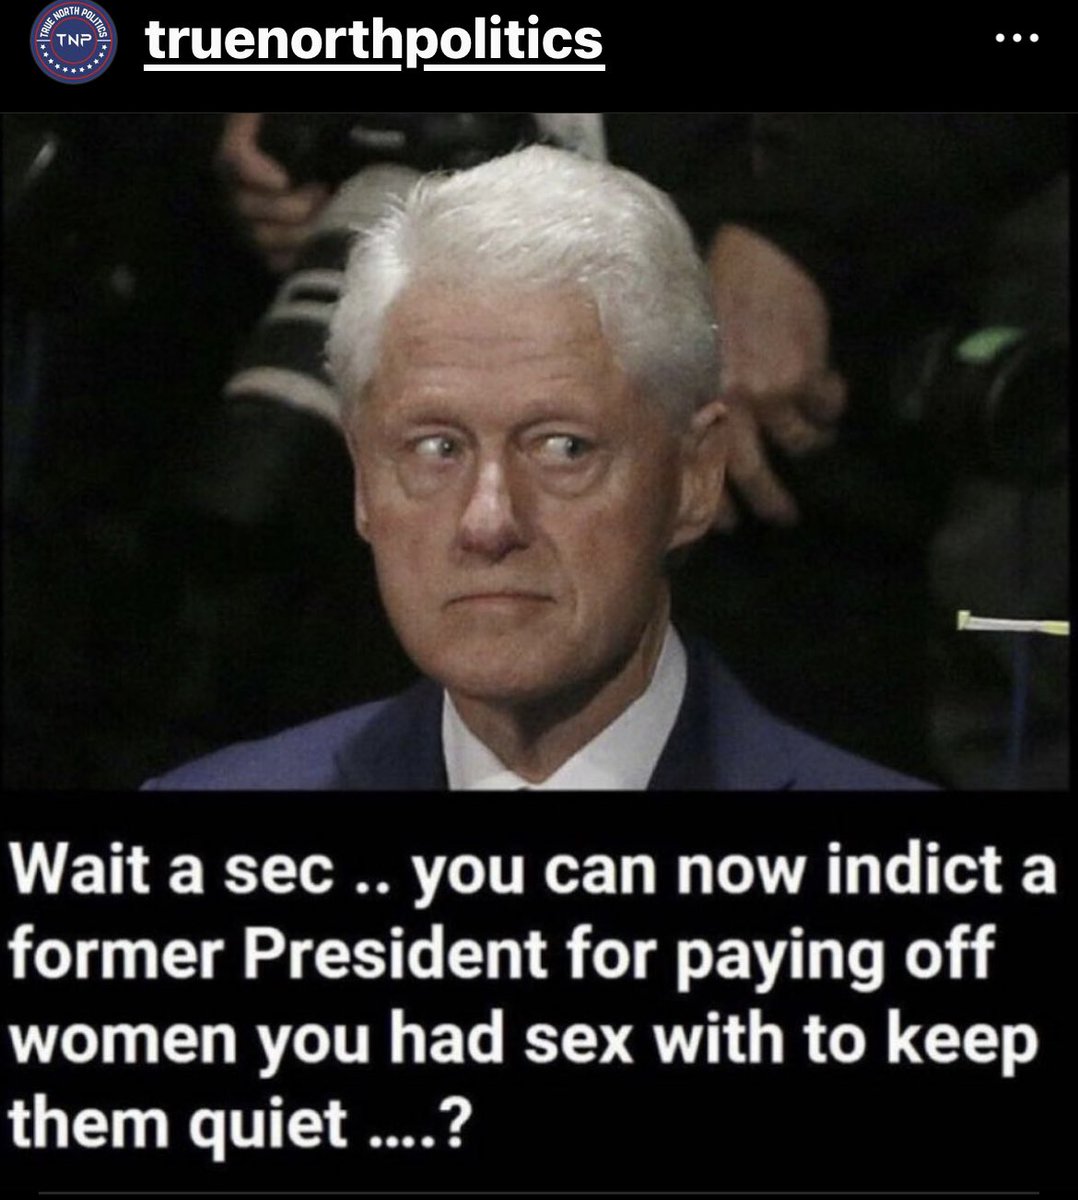 No, a former Democrat president will not get indicted, they just do that to the Republicans! You are totally safe Mr. Clinton. We all know what you did because there’s proof….Yet no indictment. 🤔 But this is different because it’s President Trump, and they are trying to convict…